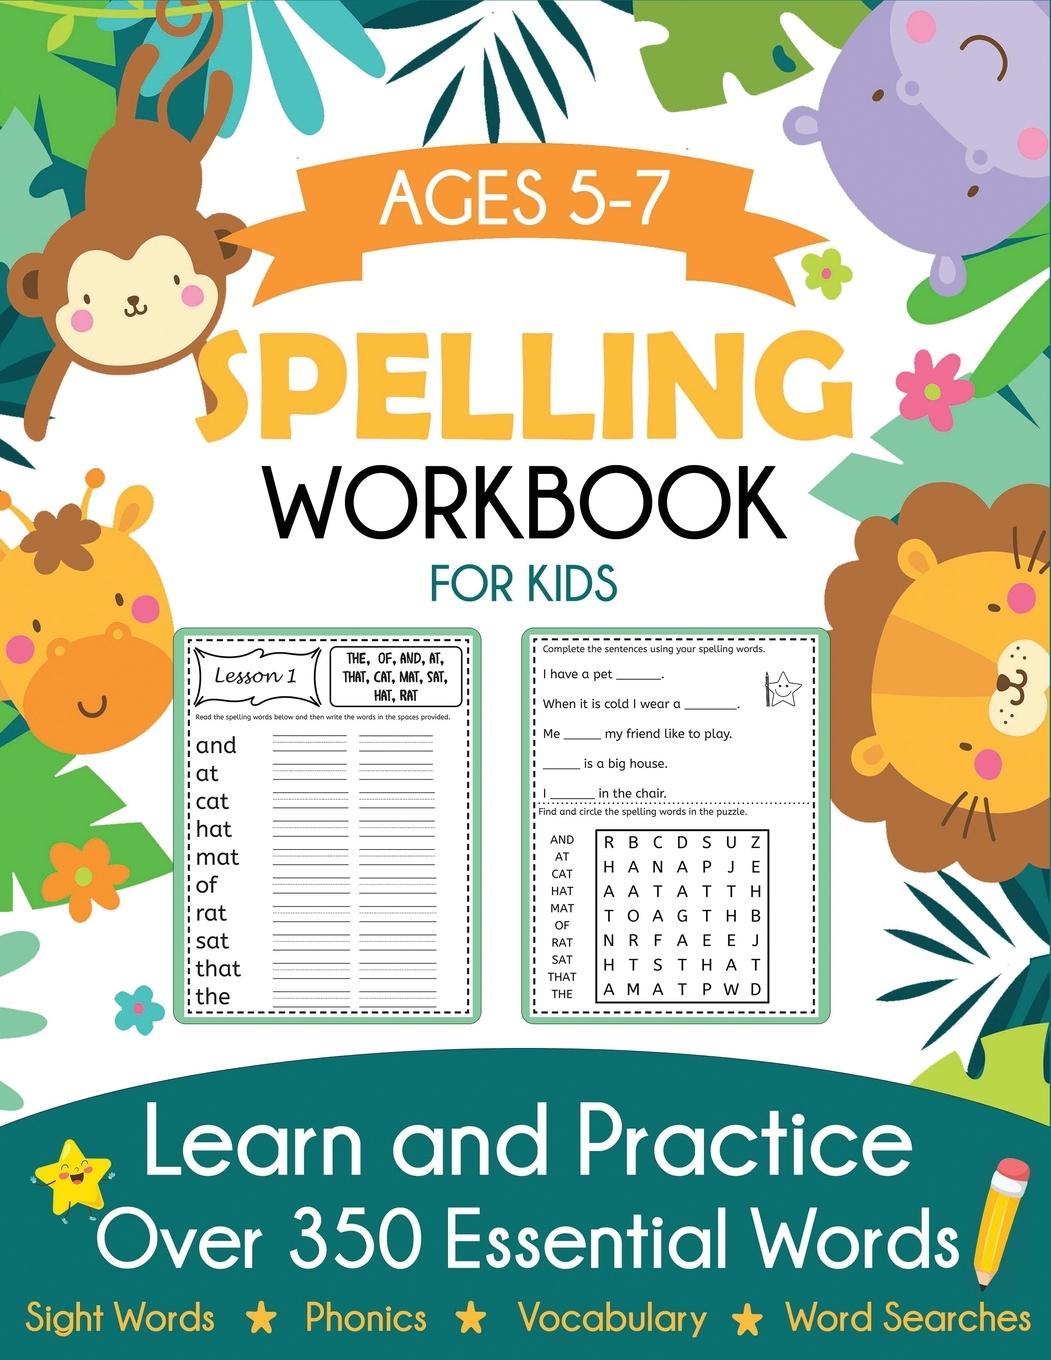 Book Spelling Workbook for Kids Ages 5-7 